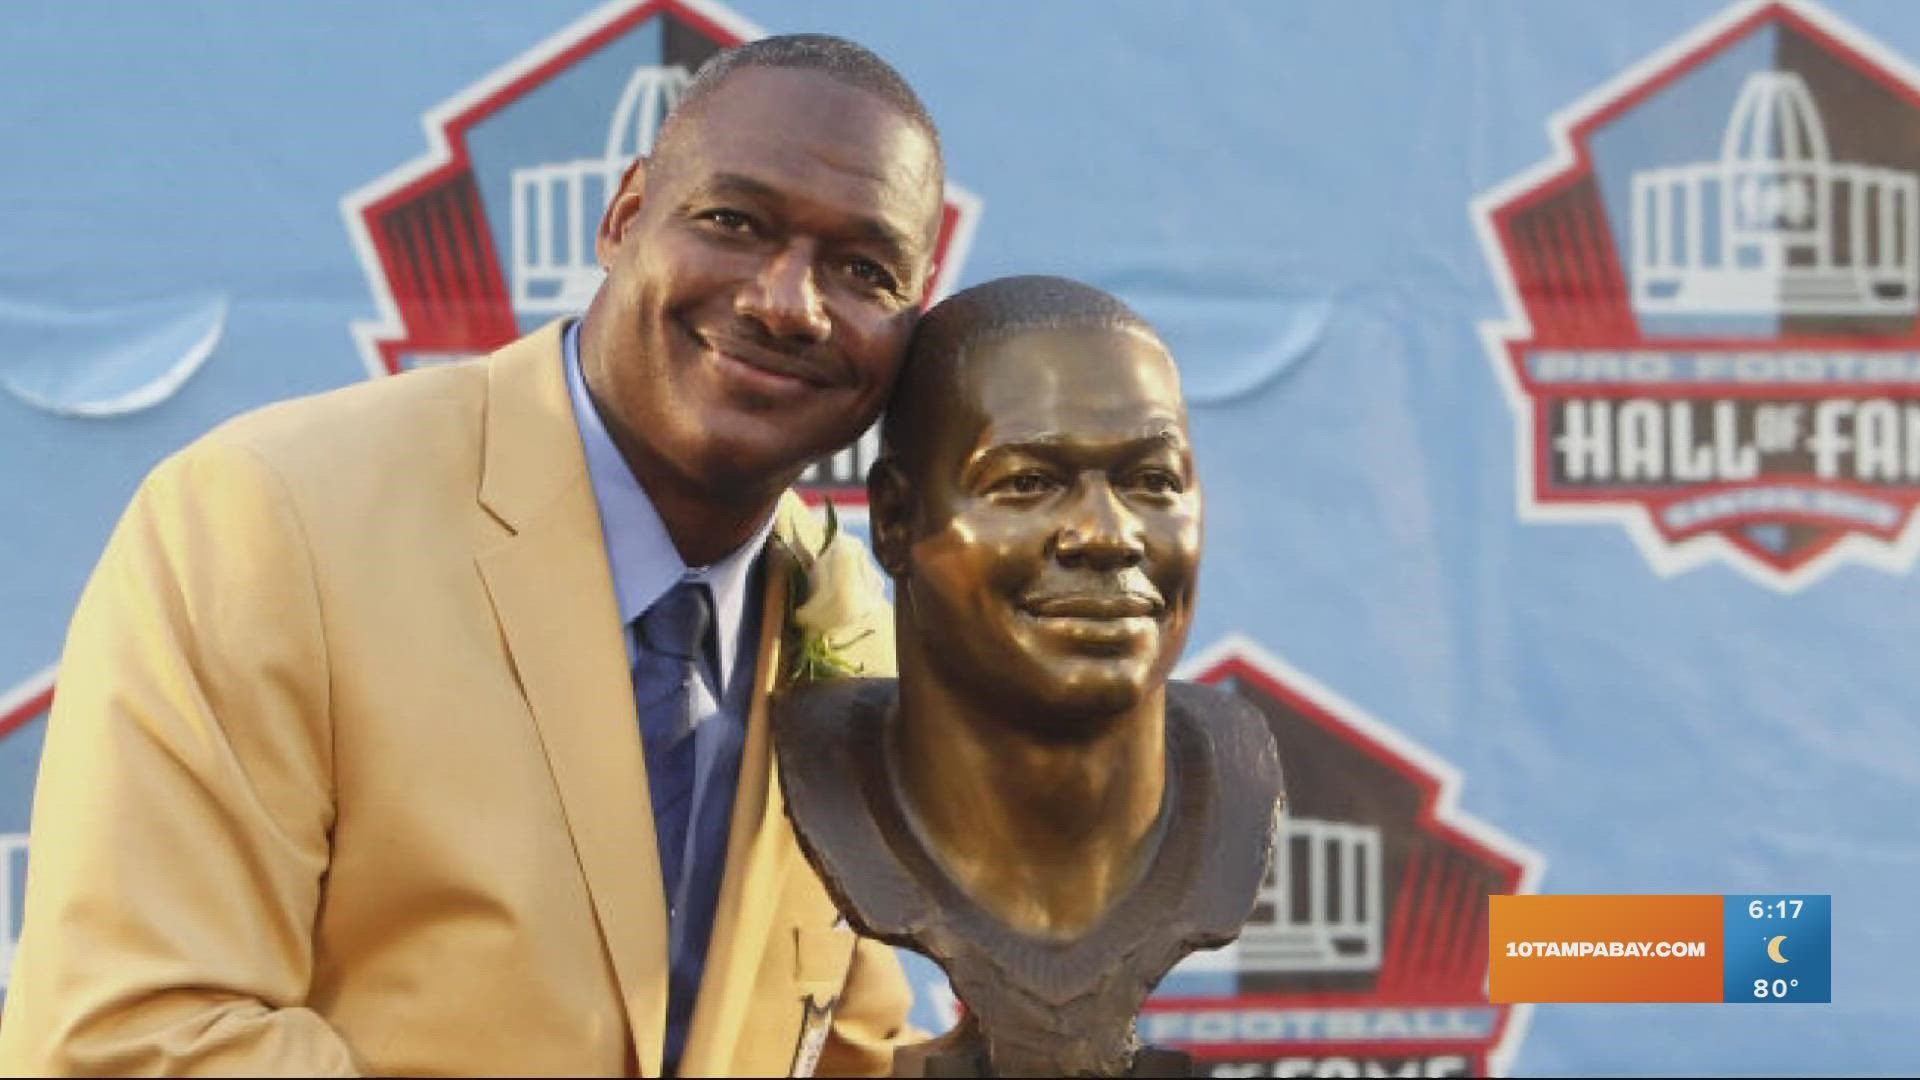 Derrick Brooks helped bring the Bucs their first Super Bowl win over 20 years ago. Now, Brooks is all about serving the local community.